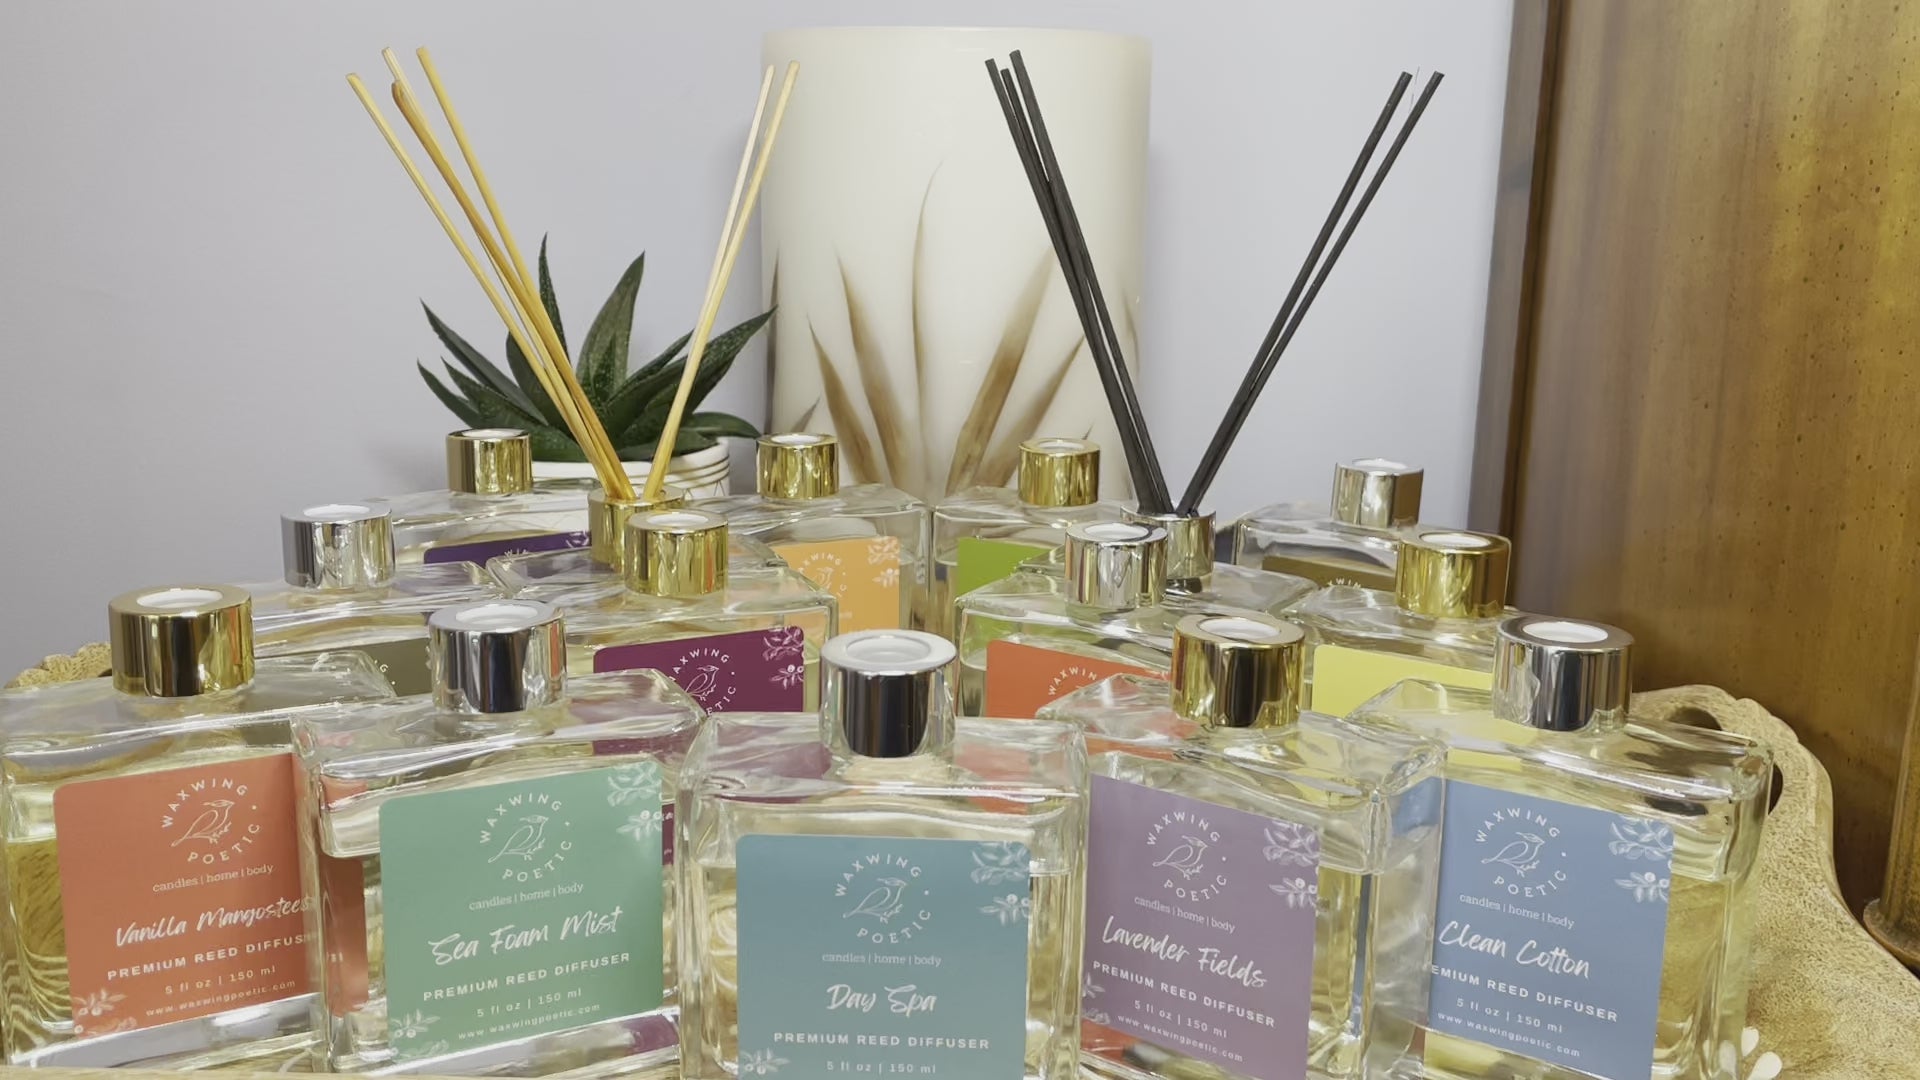 COCONUT & VANILLA Strong Scented Diffuser Aroma Reeds BEDROOM & SPA  FRAGRANCES